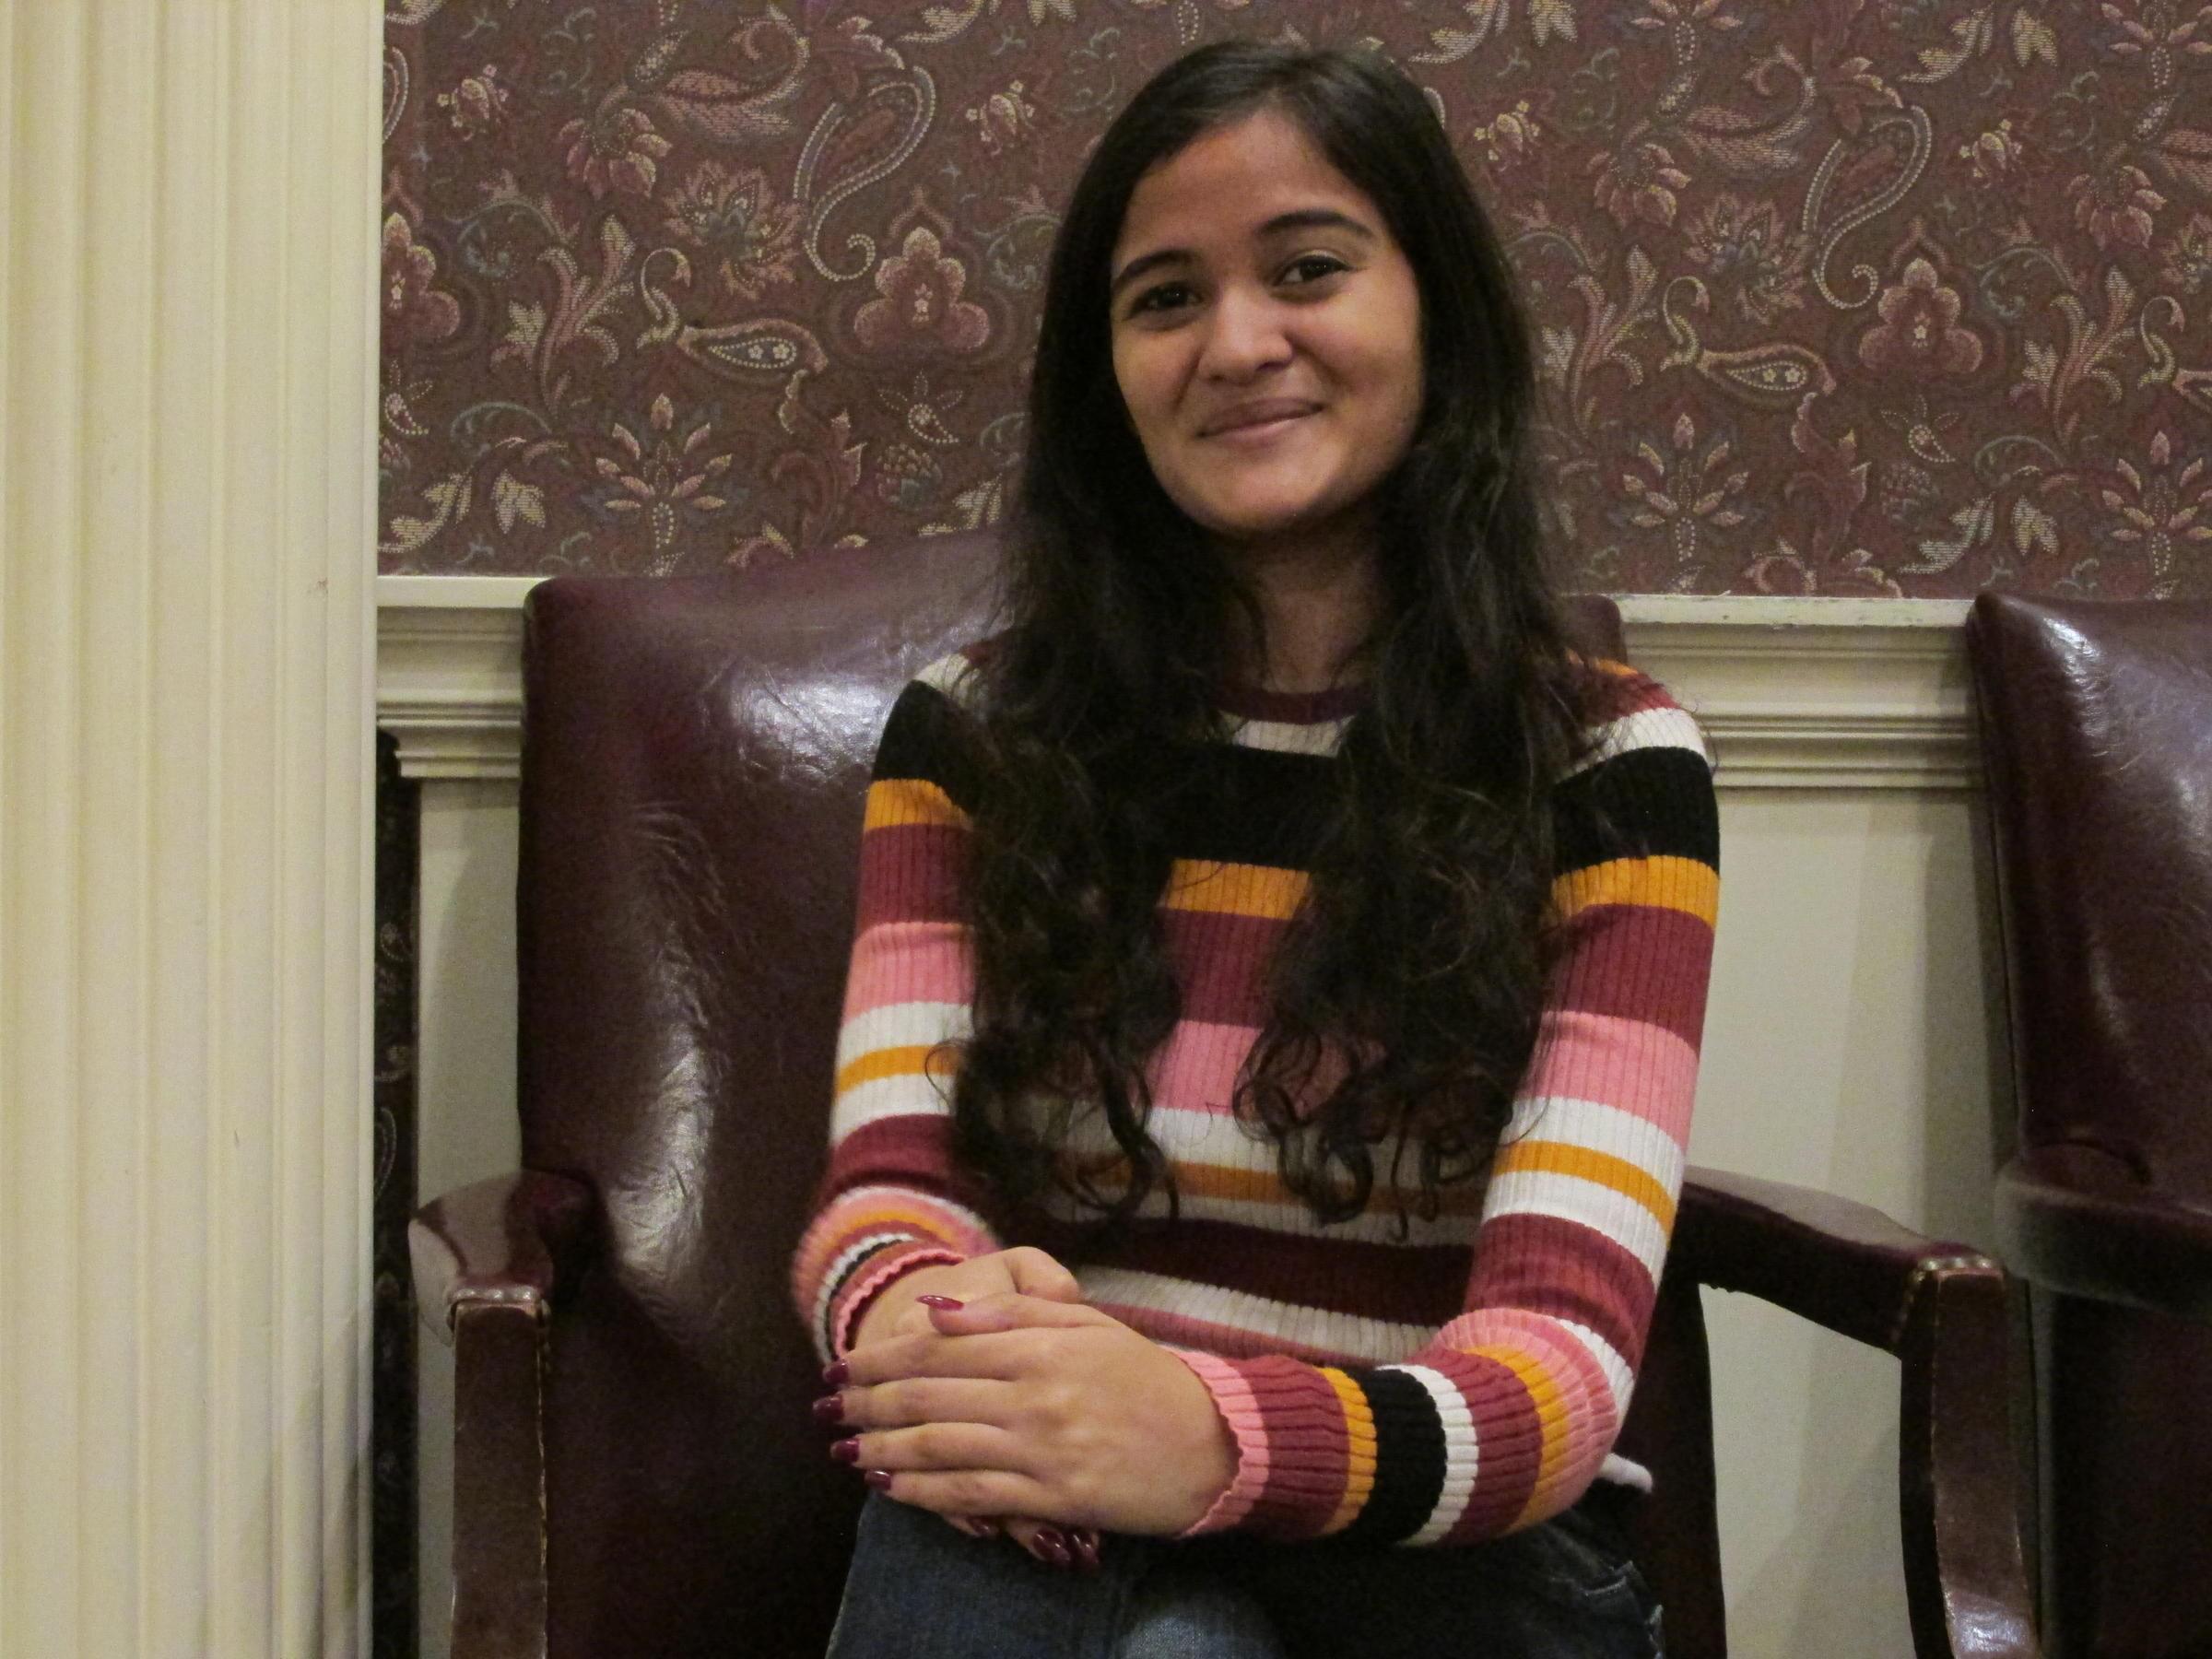 Sudarshana Rao is a senior member who also heads the campus organization Students Against Sexual Assault. She says students want a seat at the table as talks of the recommendations continue.